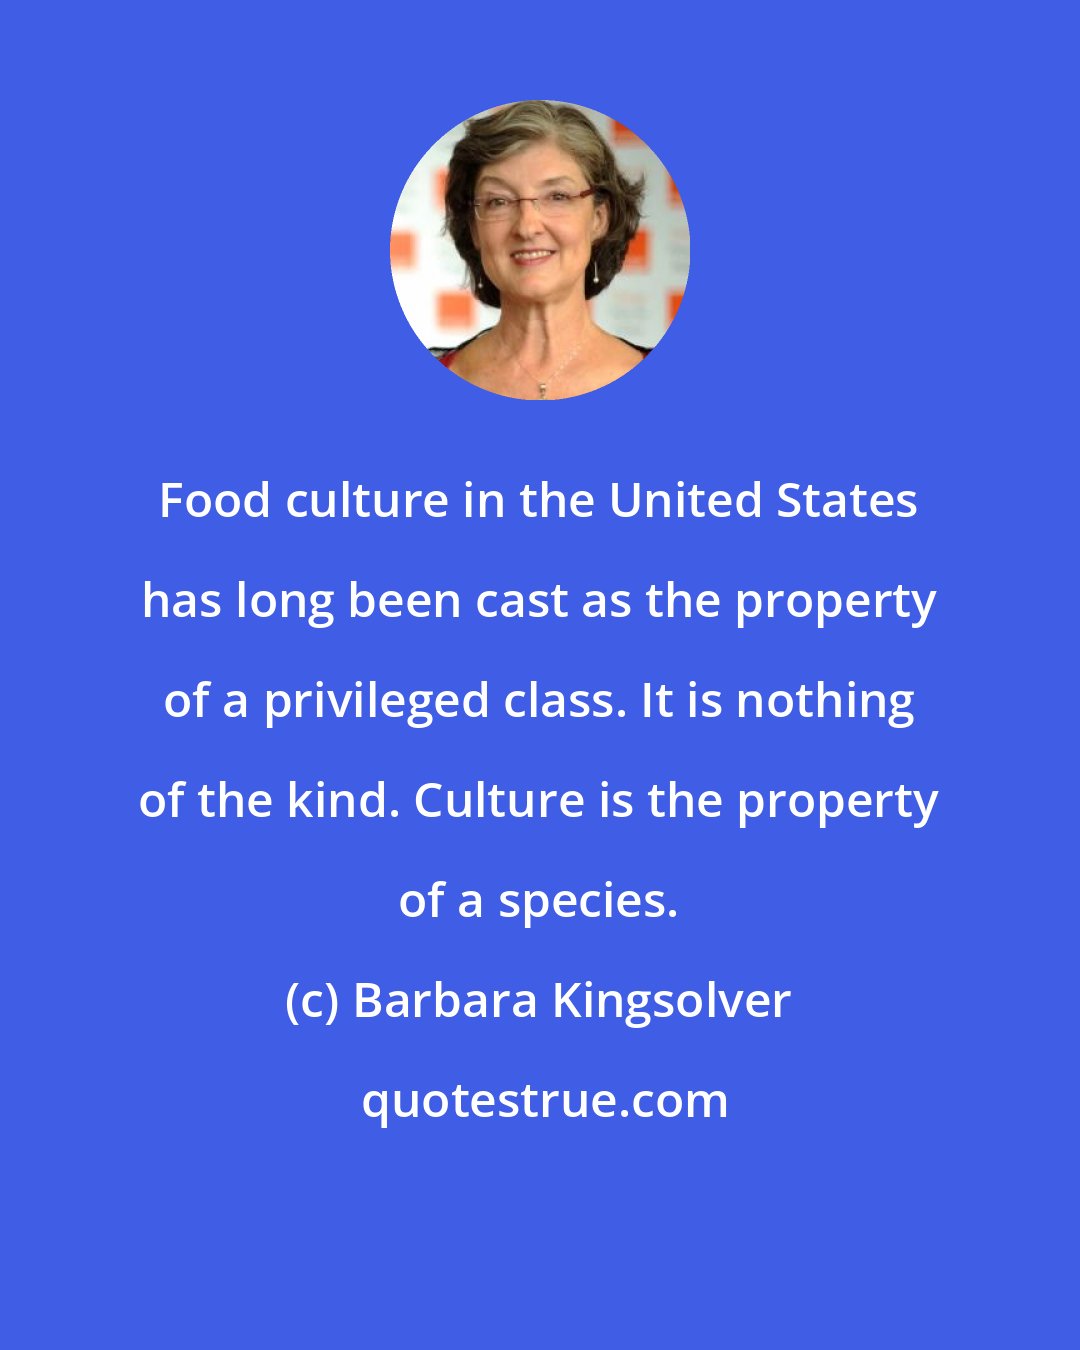 Barbara Kingsolver: Food culture in the United States has long been cast as the property of a privileged class. It is nothing of the kind. Culture is the property of a species.